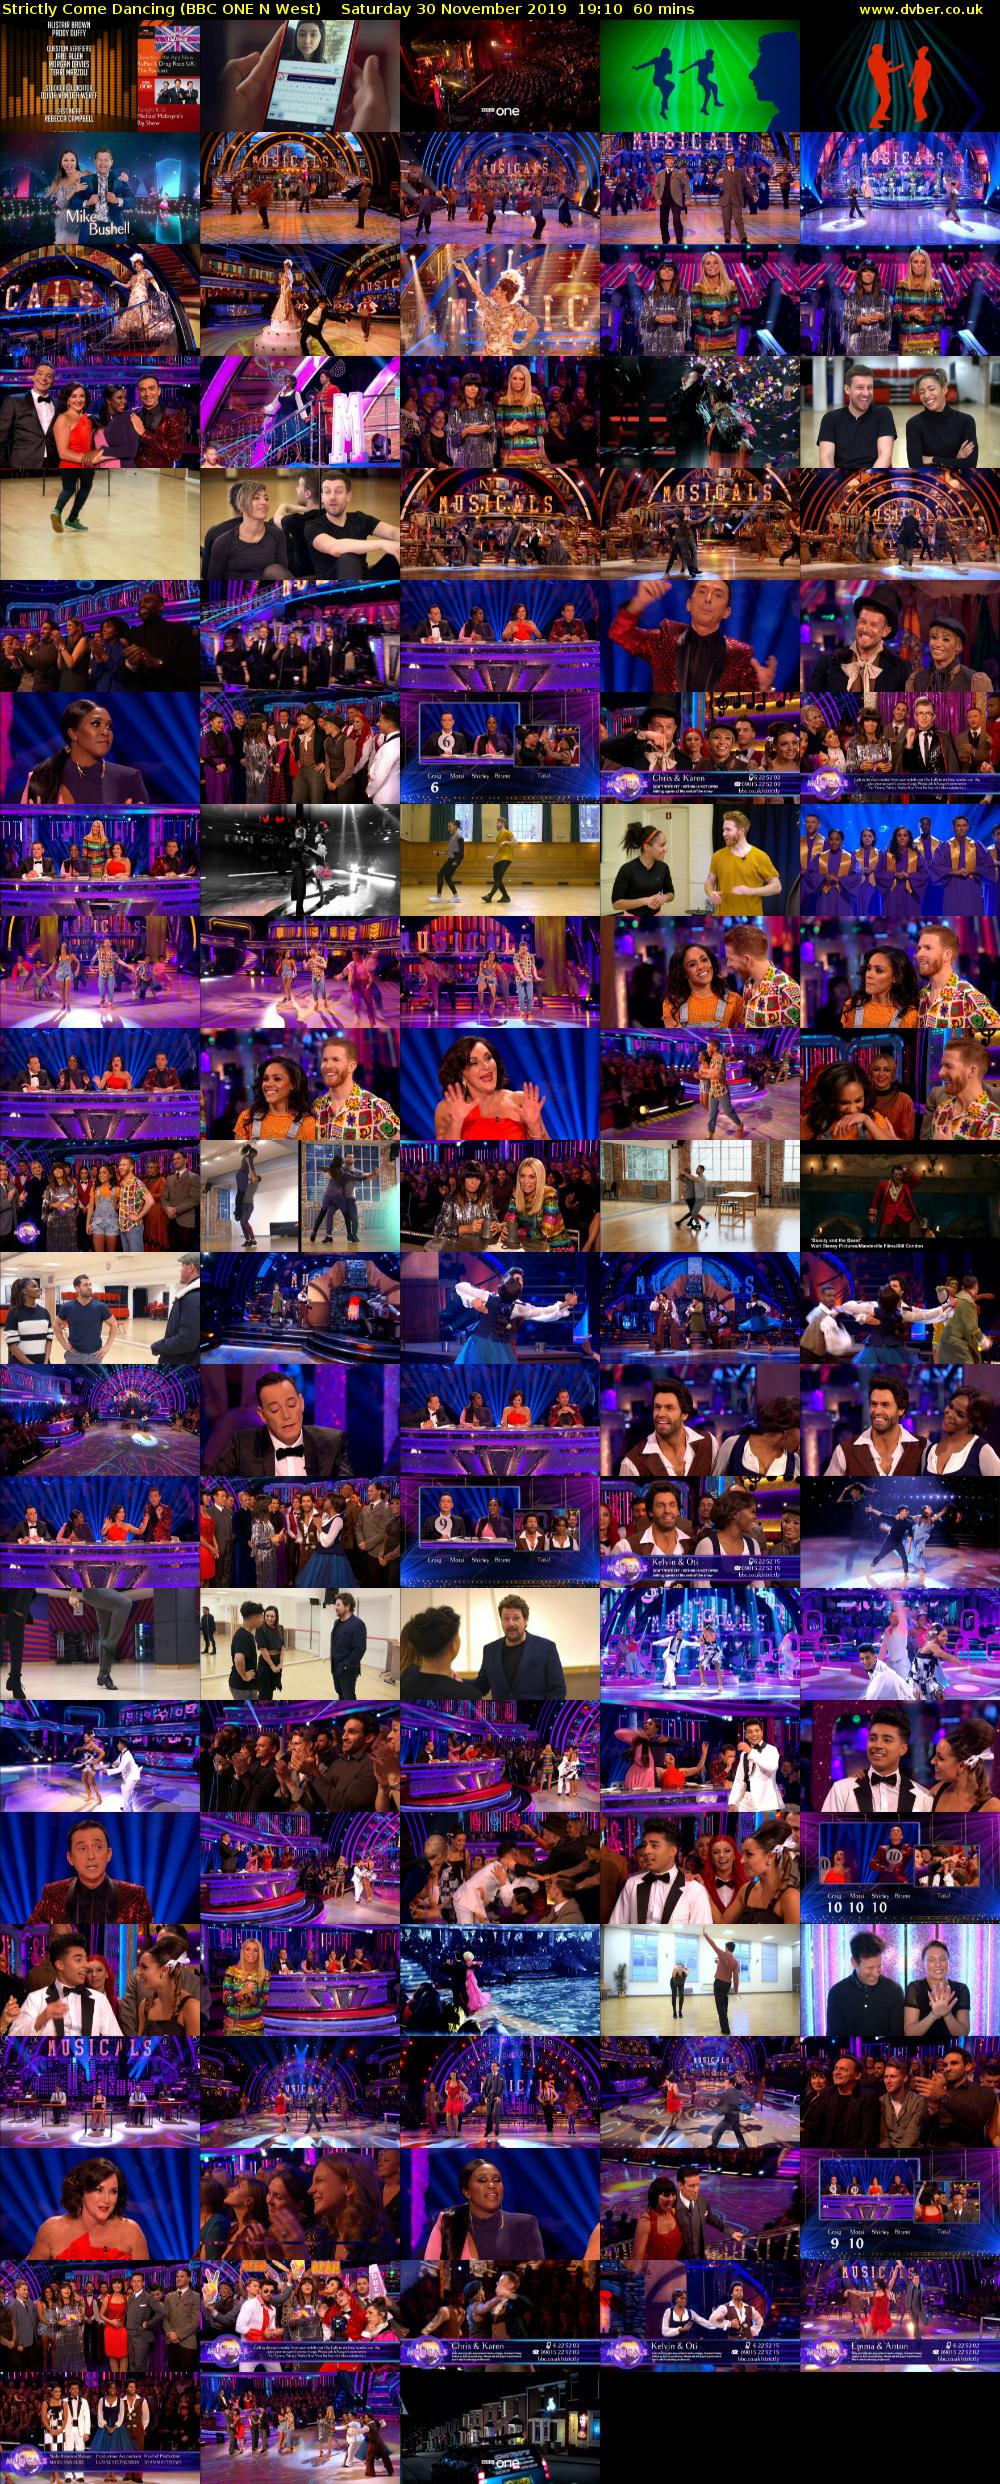 Strictly Come Dancing (BBC ONE N West) Saturday 30 November 2019 19:10 - 20:10